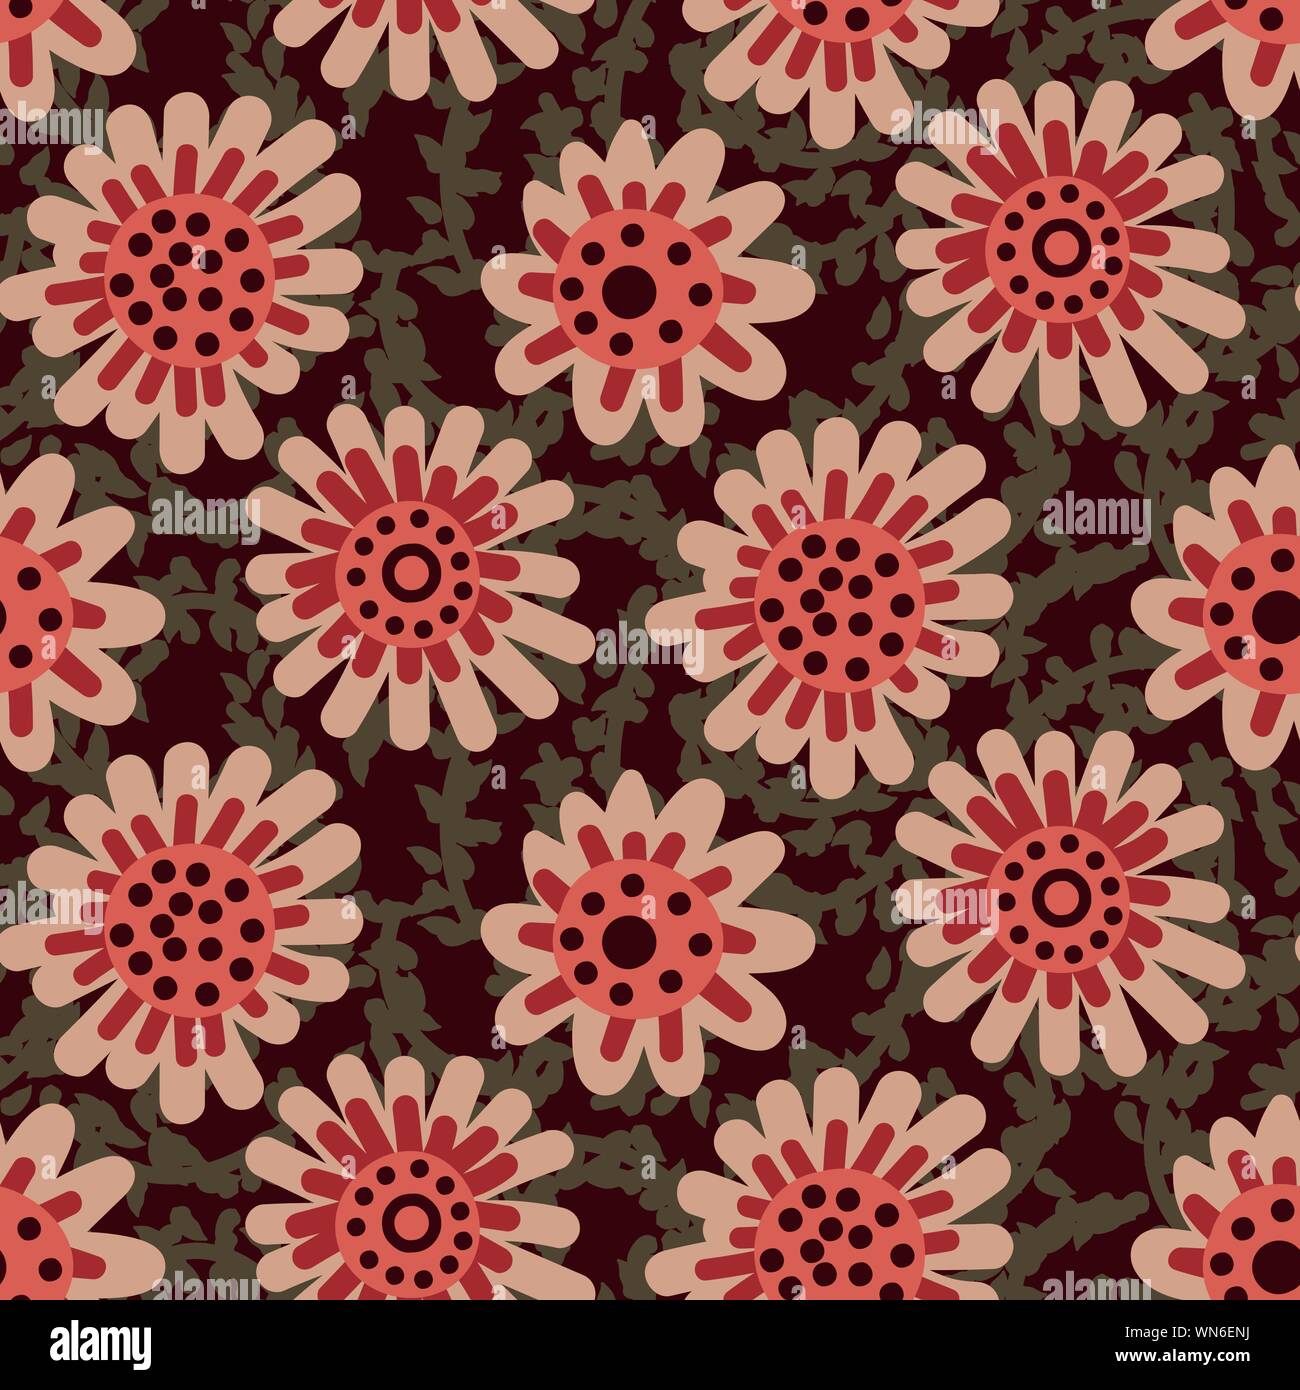 seamless vector pattern with simple round flowers in red and brown Stock Vector